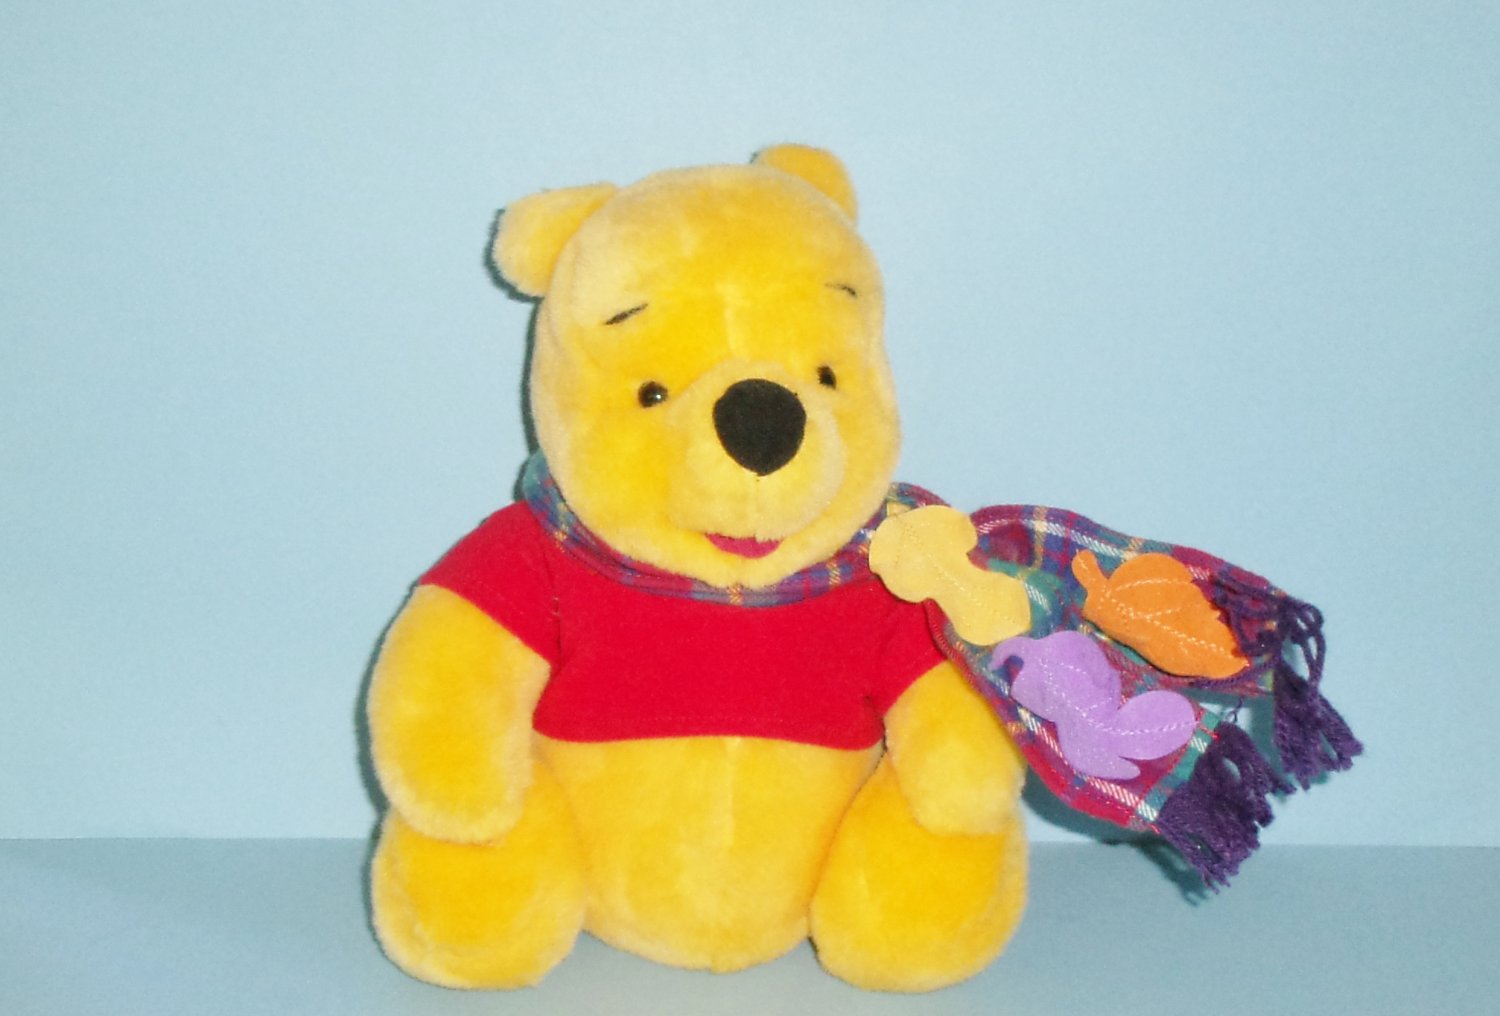 Plush Winnie the Pooh Blustery Day Pooh Wearing Scarf 1998 Mattel